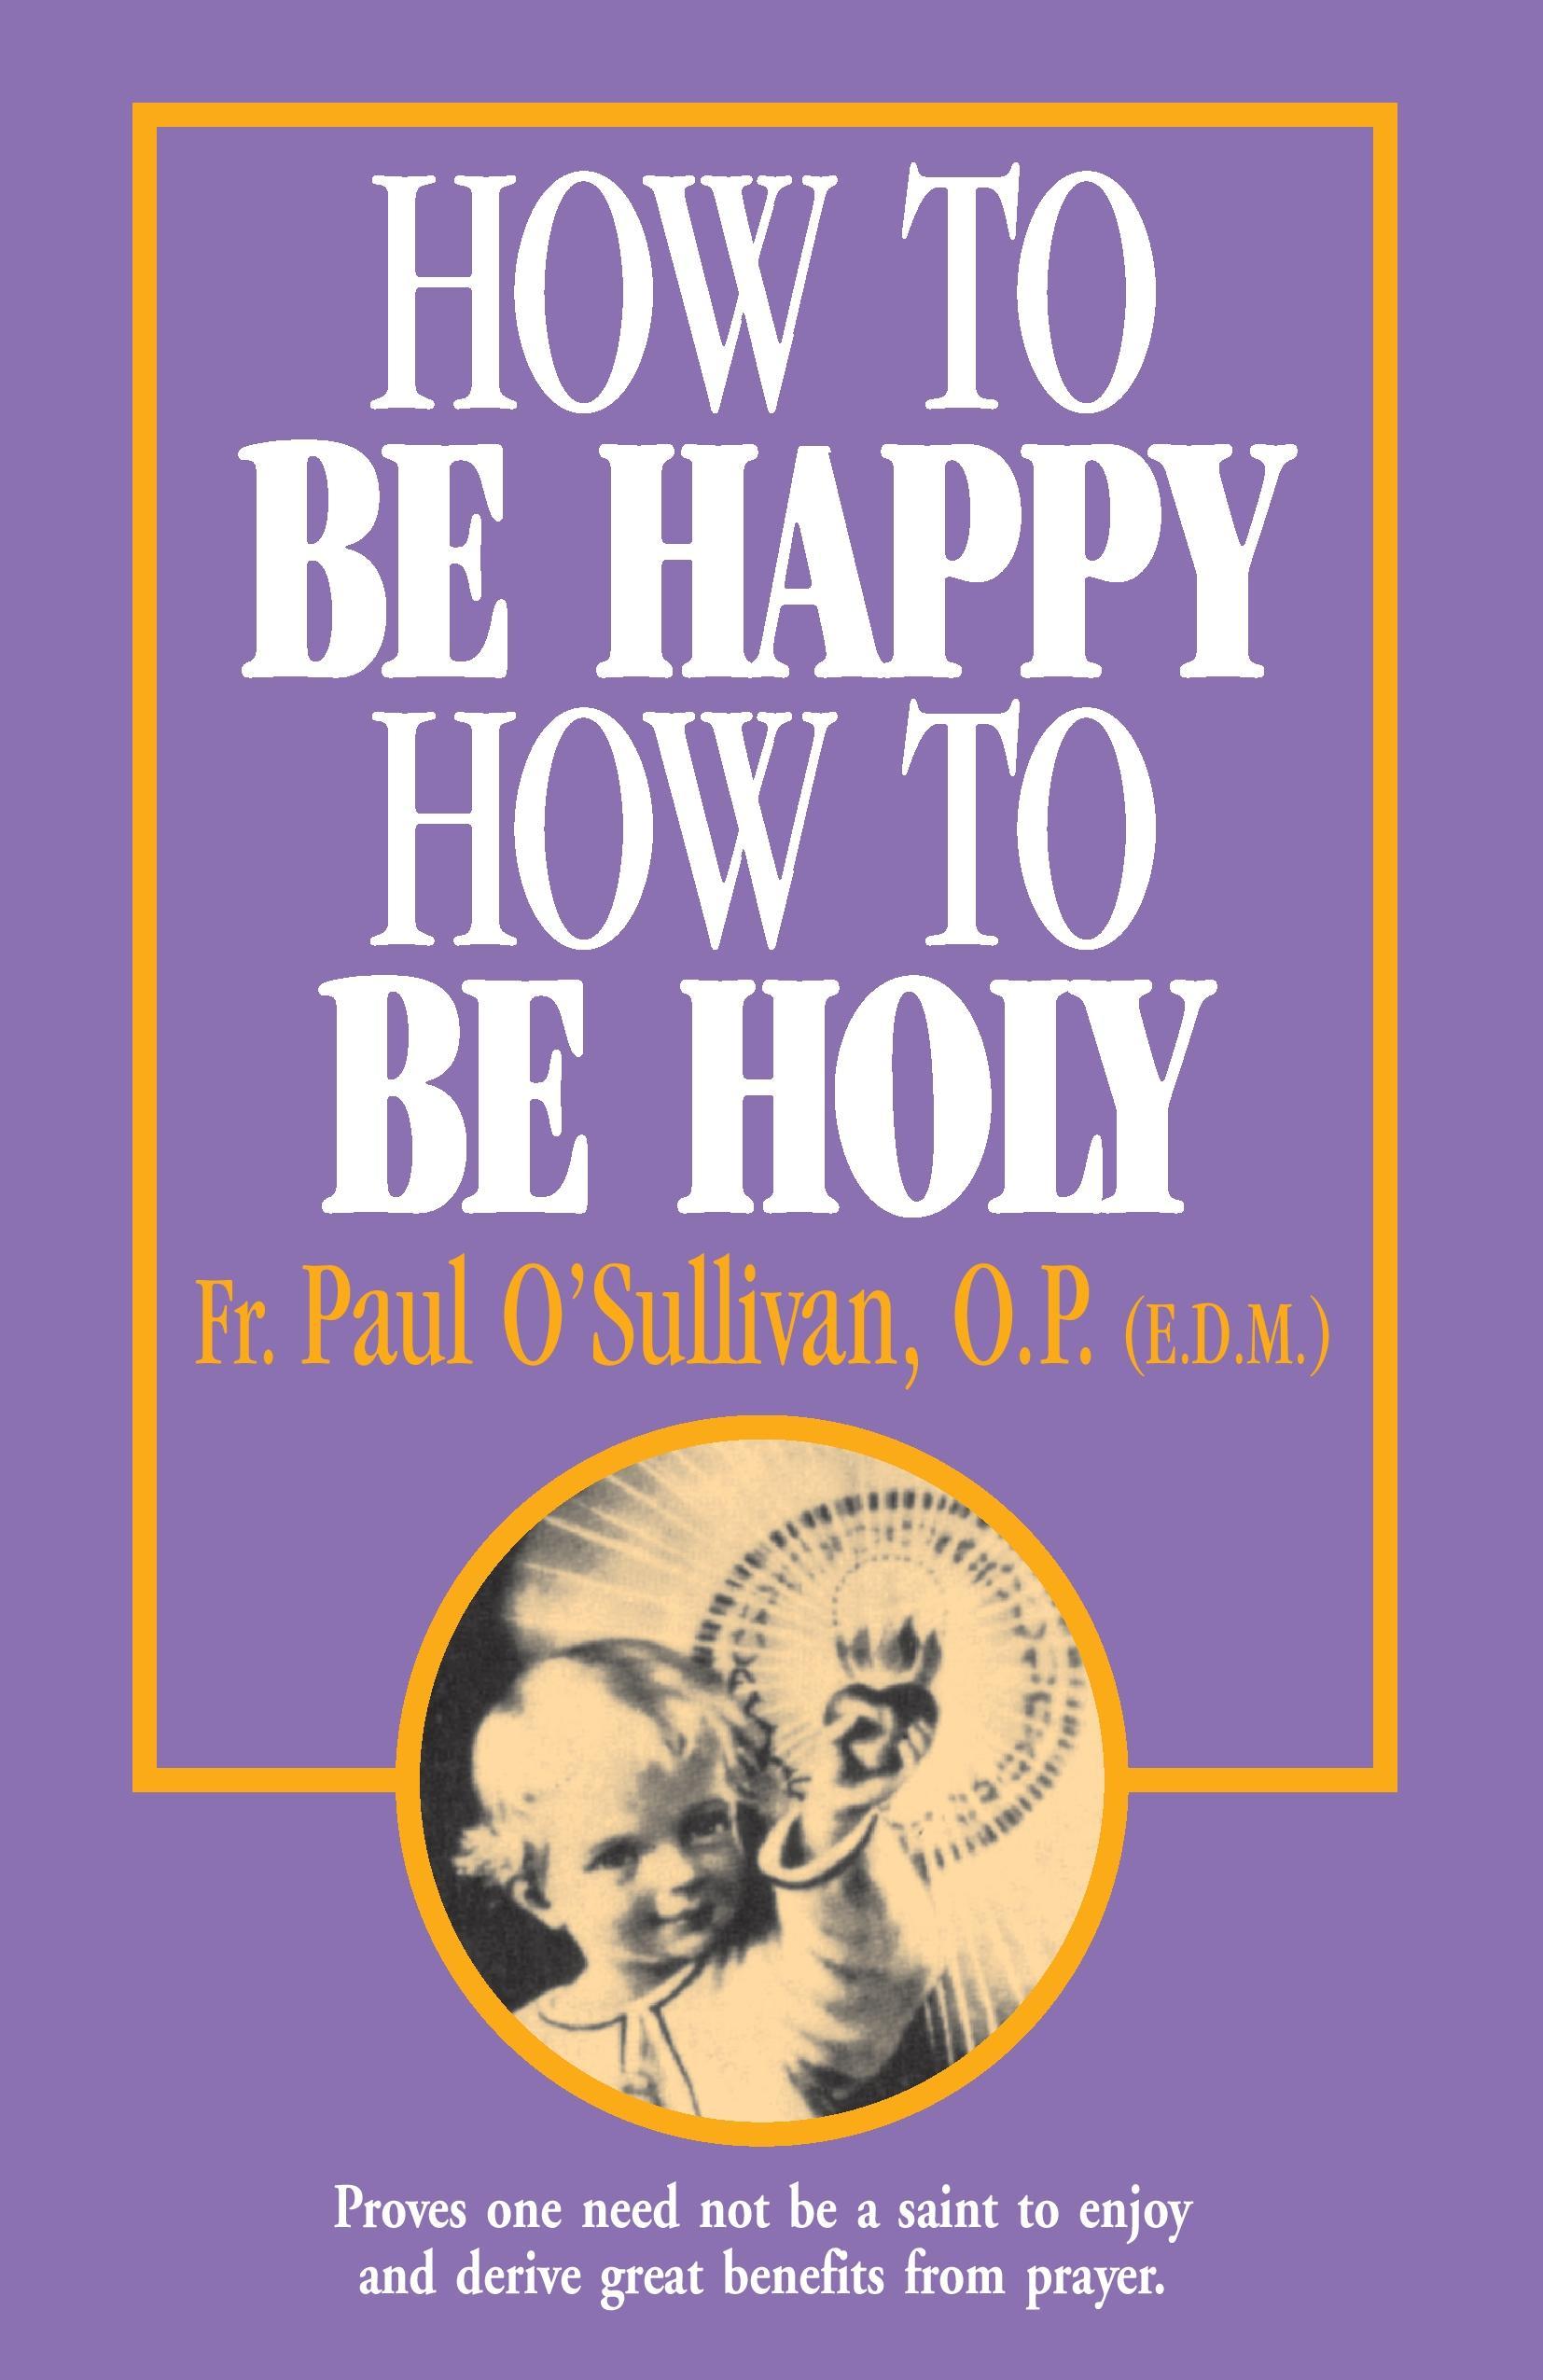 How to Be Happy - How to Be Holy - Osullivan, P. O Sullivan, Paul O Sullivan, Op Fr Paul